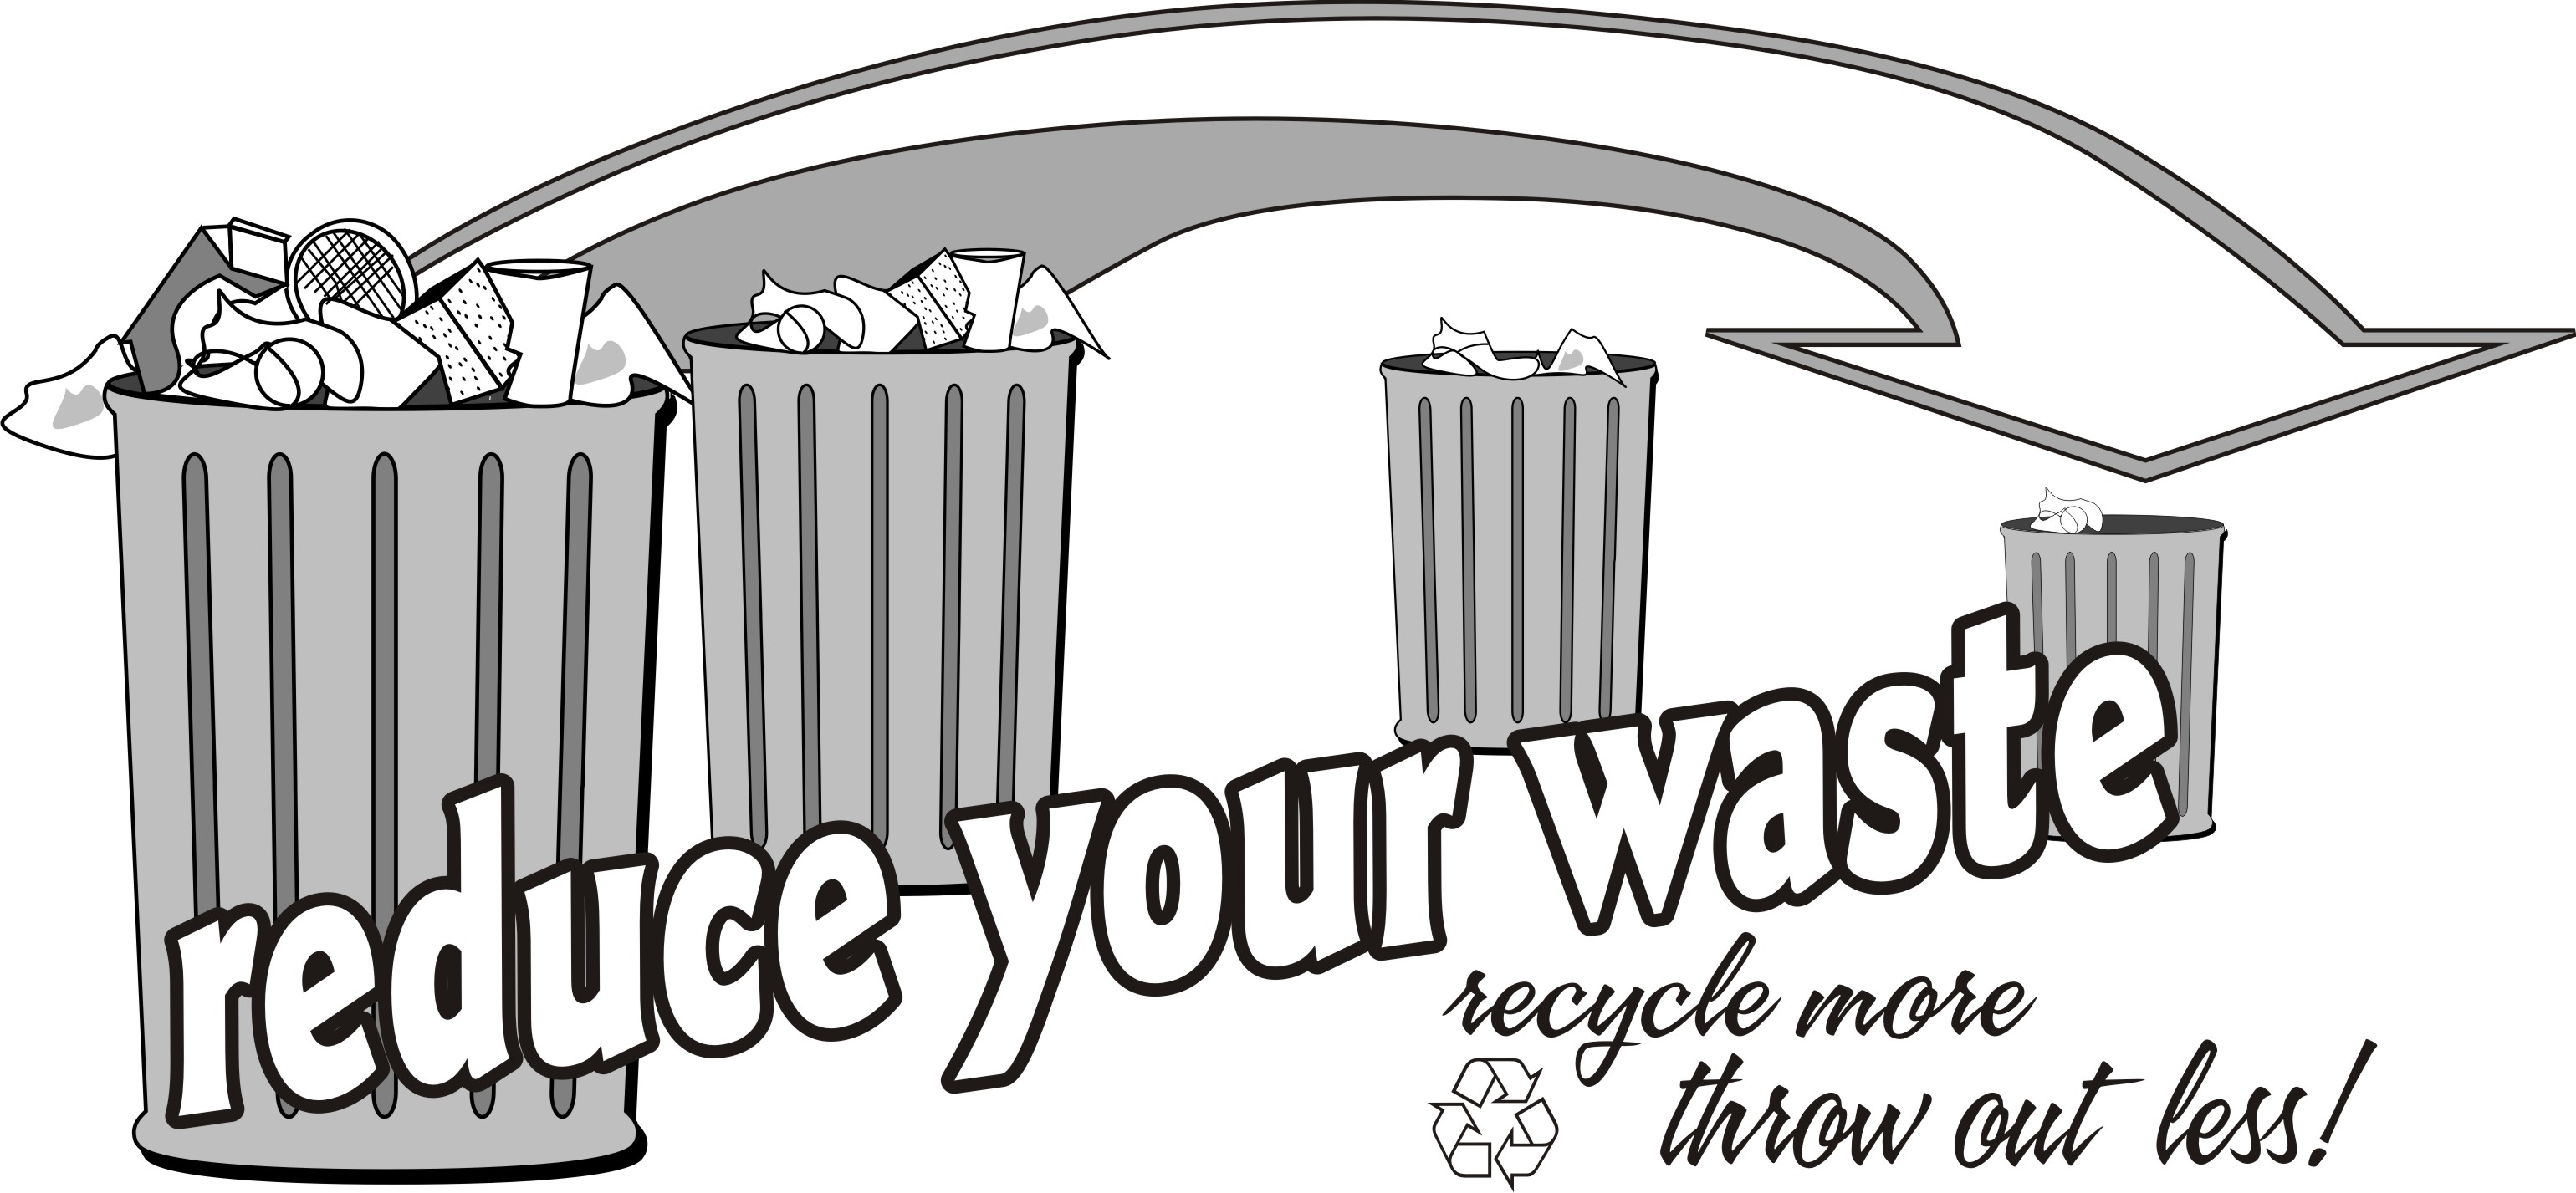 Reduce картинки. Reduce waste. Reduce reuse recycle. Reduce your waste.